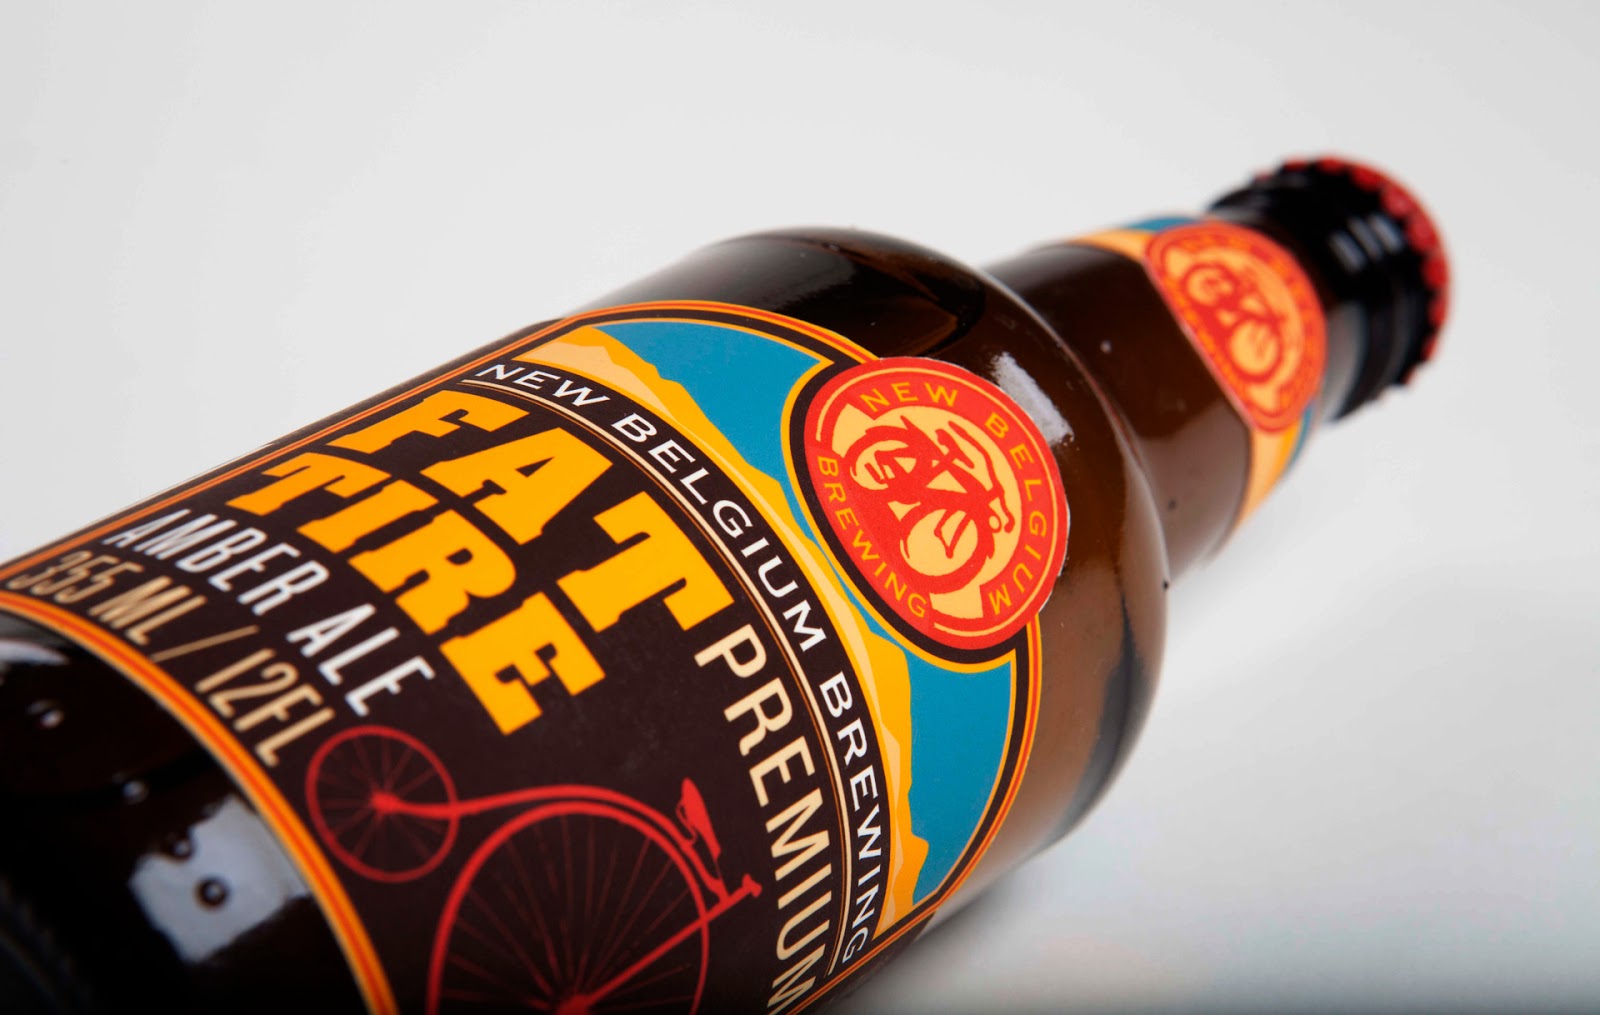 Fat Tire Abv 77